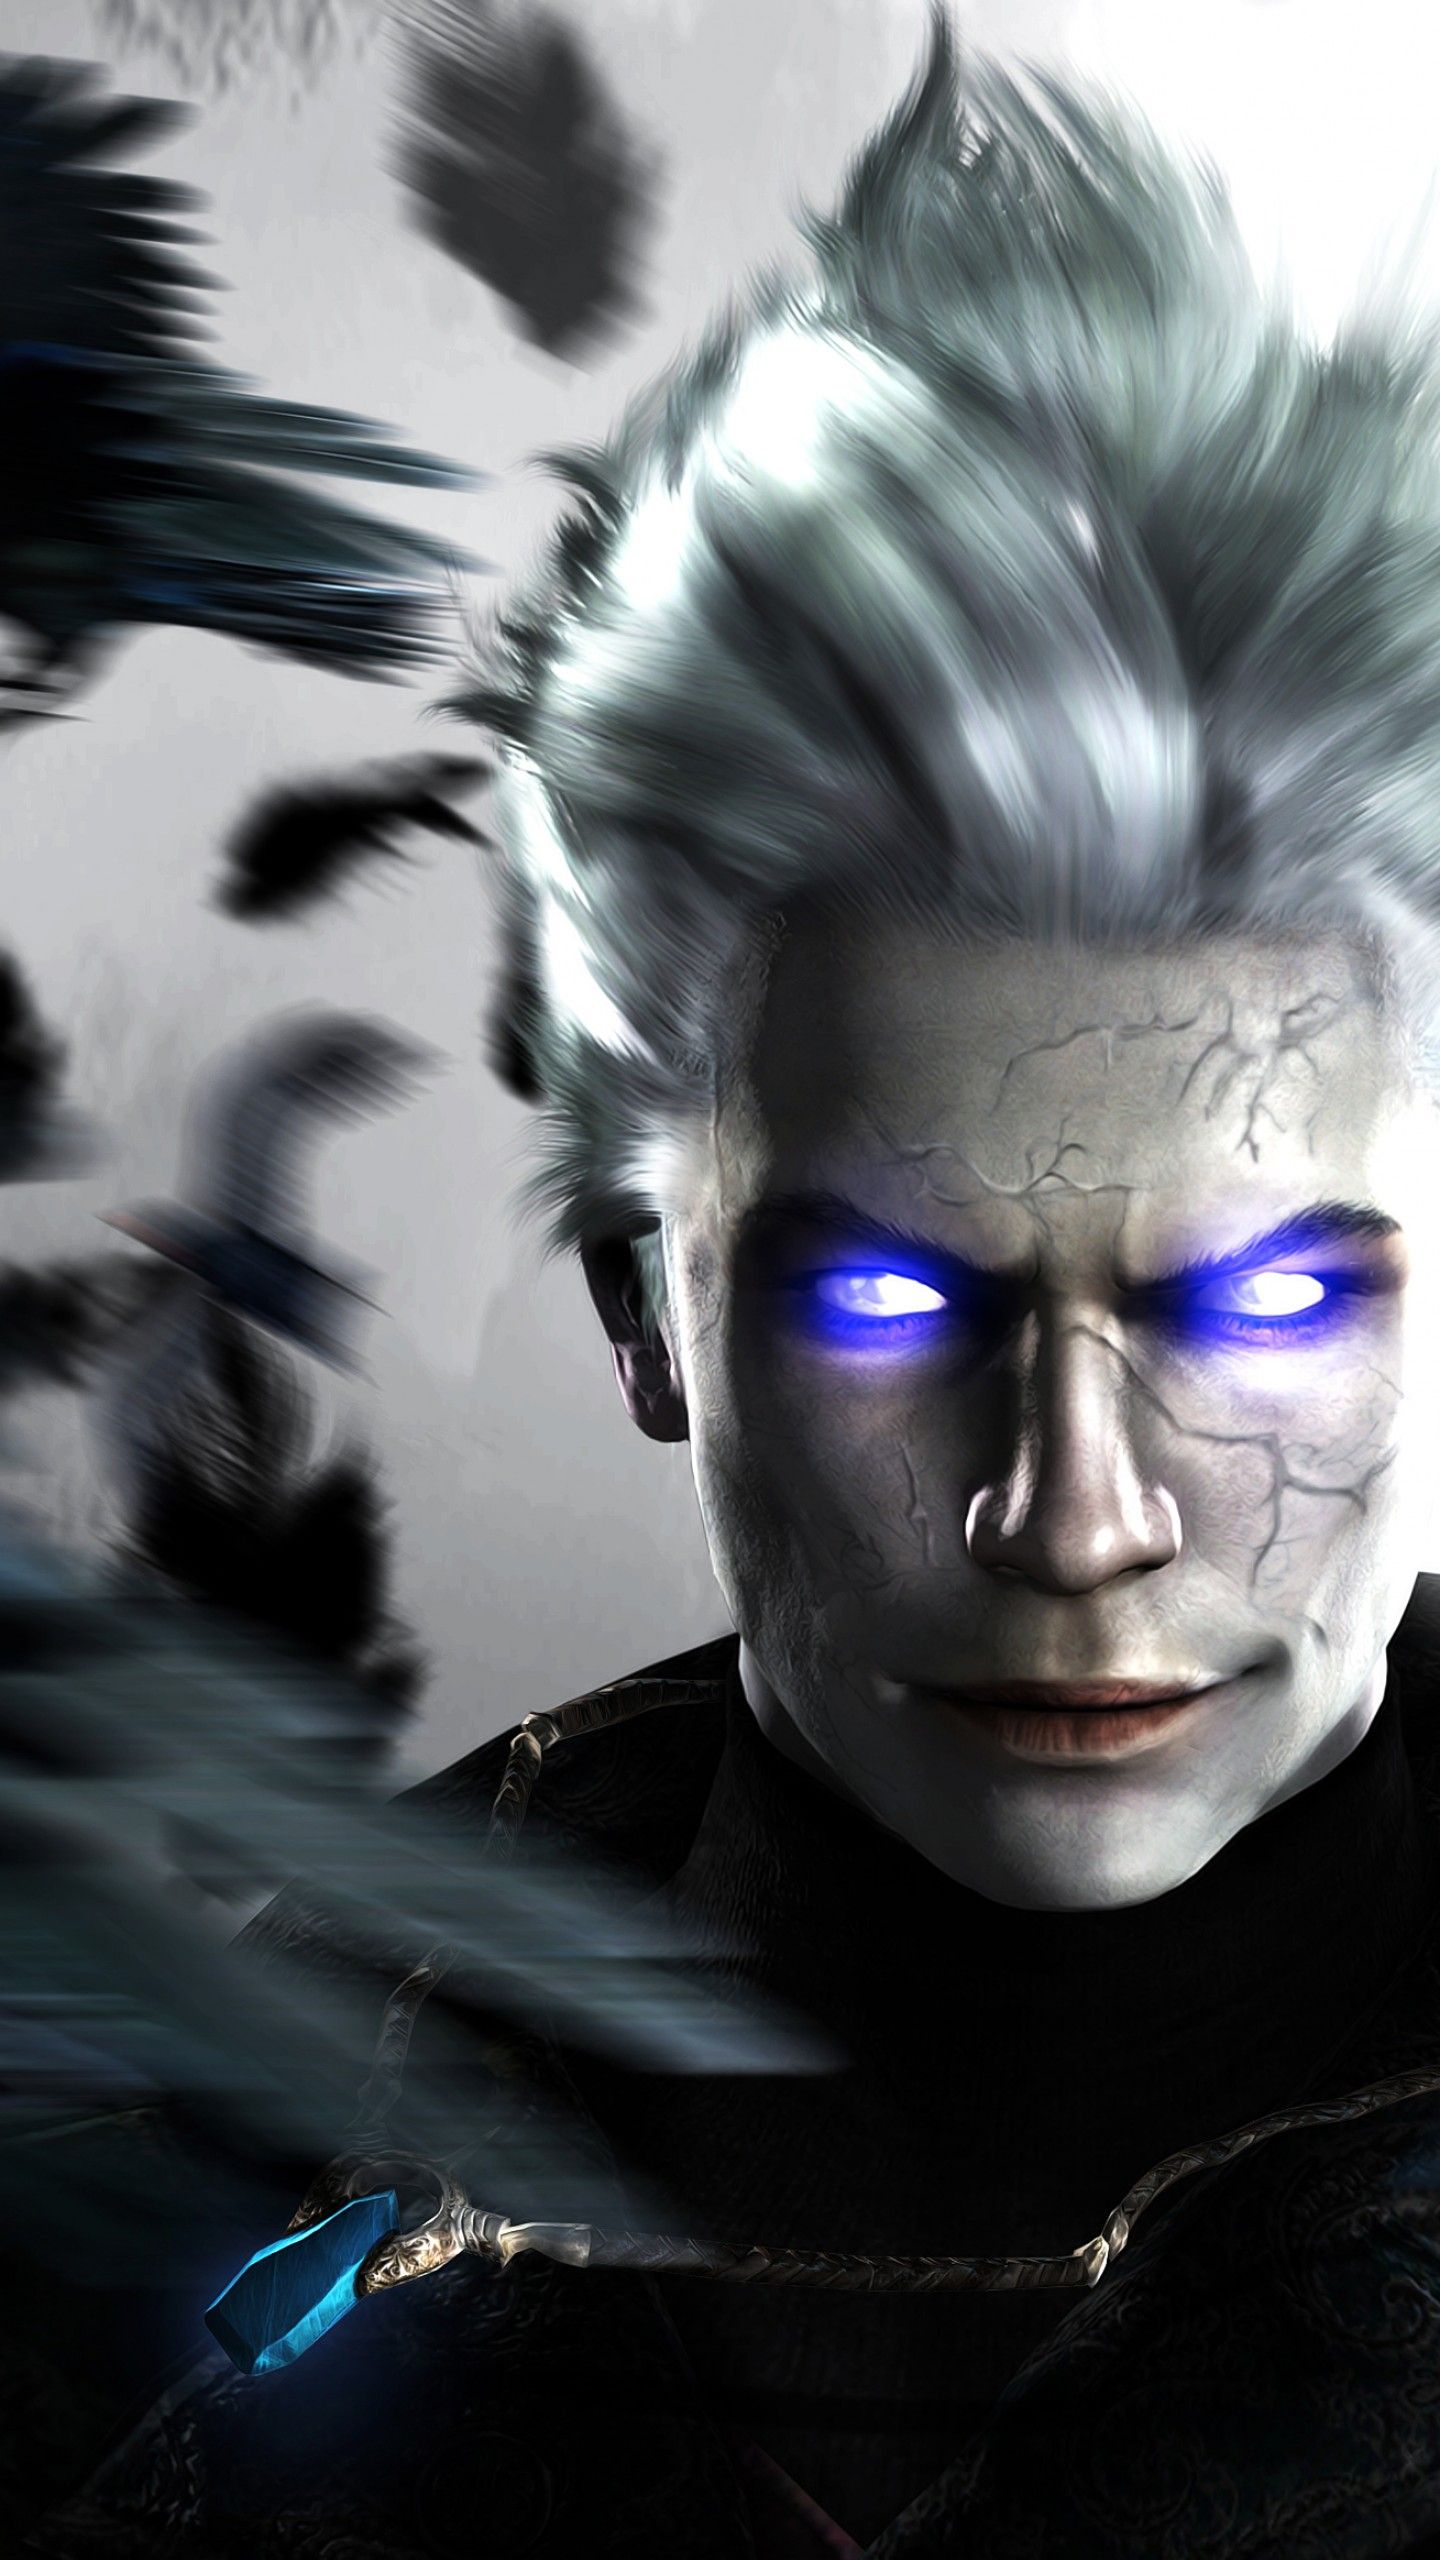 Vergil Android Wallpapers - Wallpaper Cave Vergil Devil May Cry 3 Wallpaper